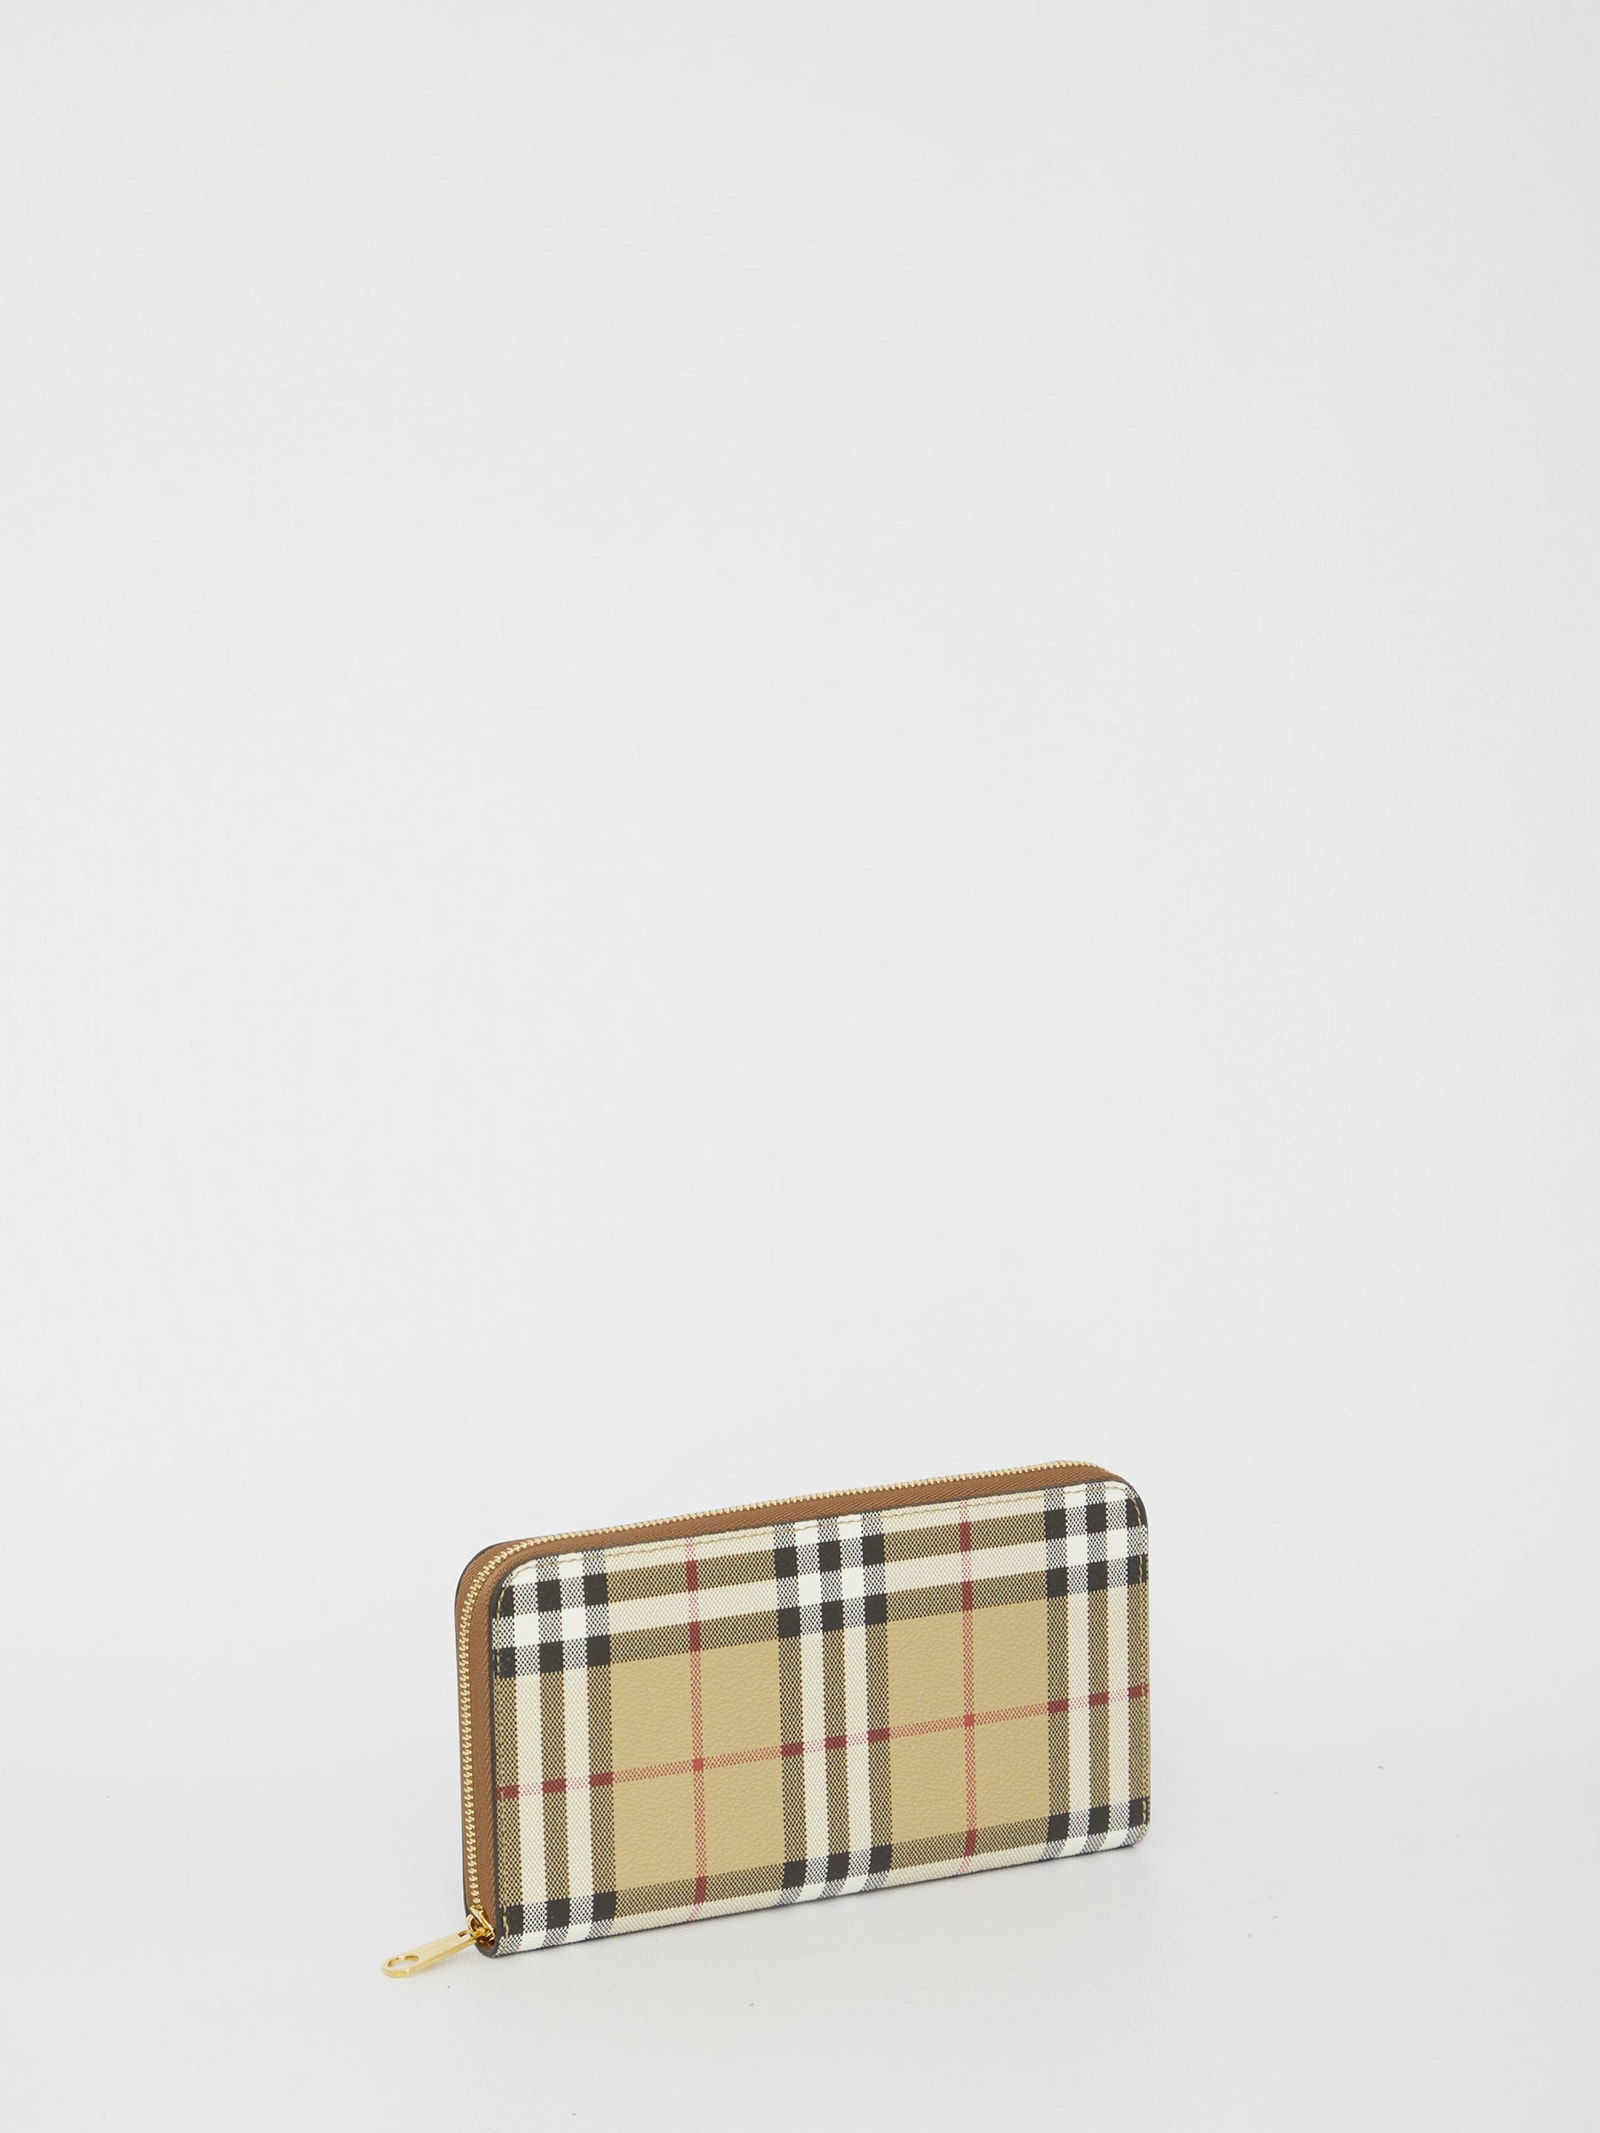 NWT Burberry Vintage Check Wallet +PRICE IS FIRM+